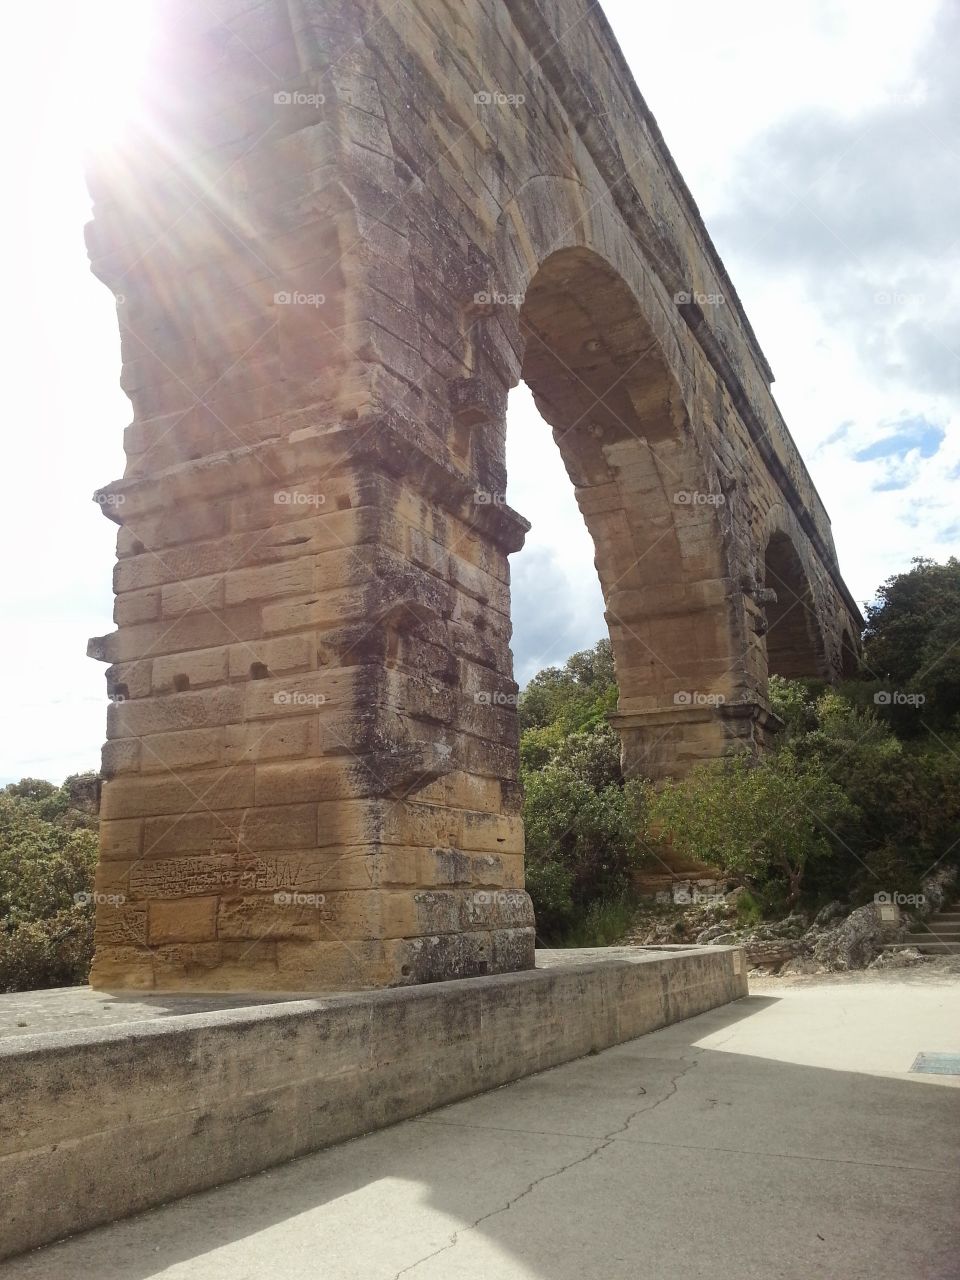 The sun shining through the aquaduct in the South of France